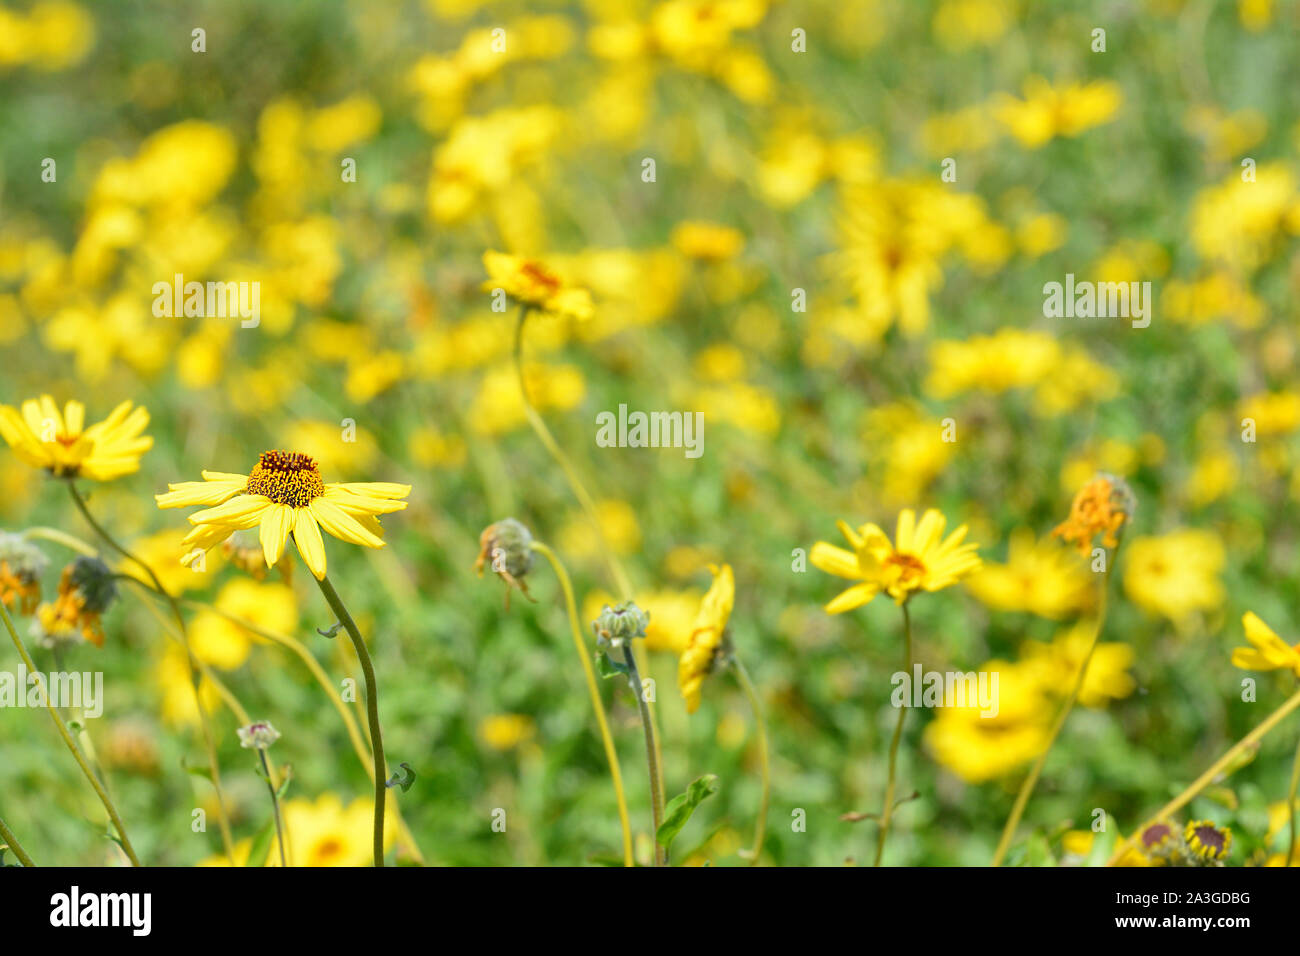 A single in focus yellow daisy like flower against a field of out of focus Flowers Stock Photo